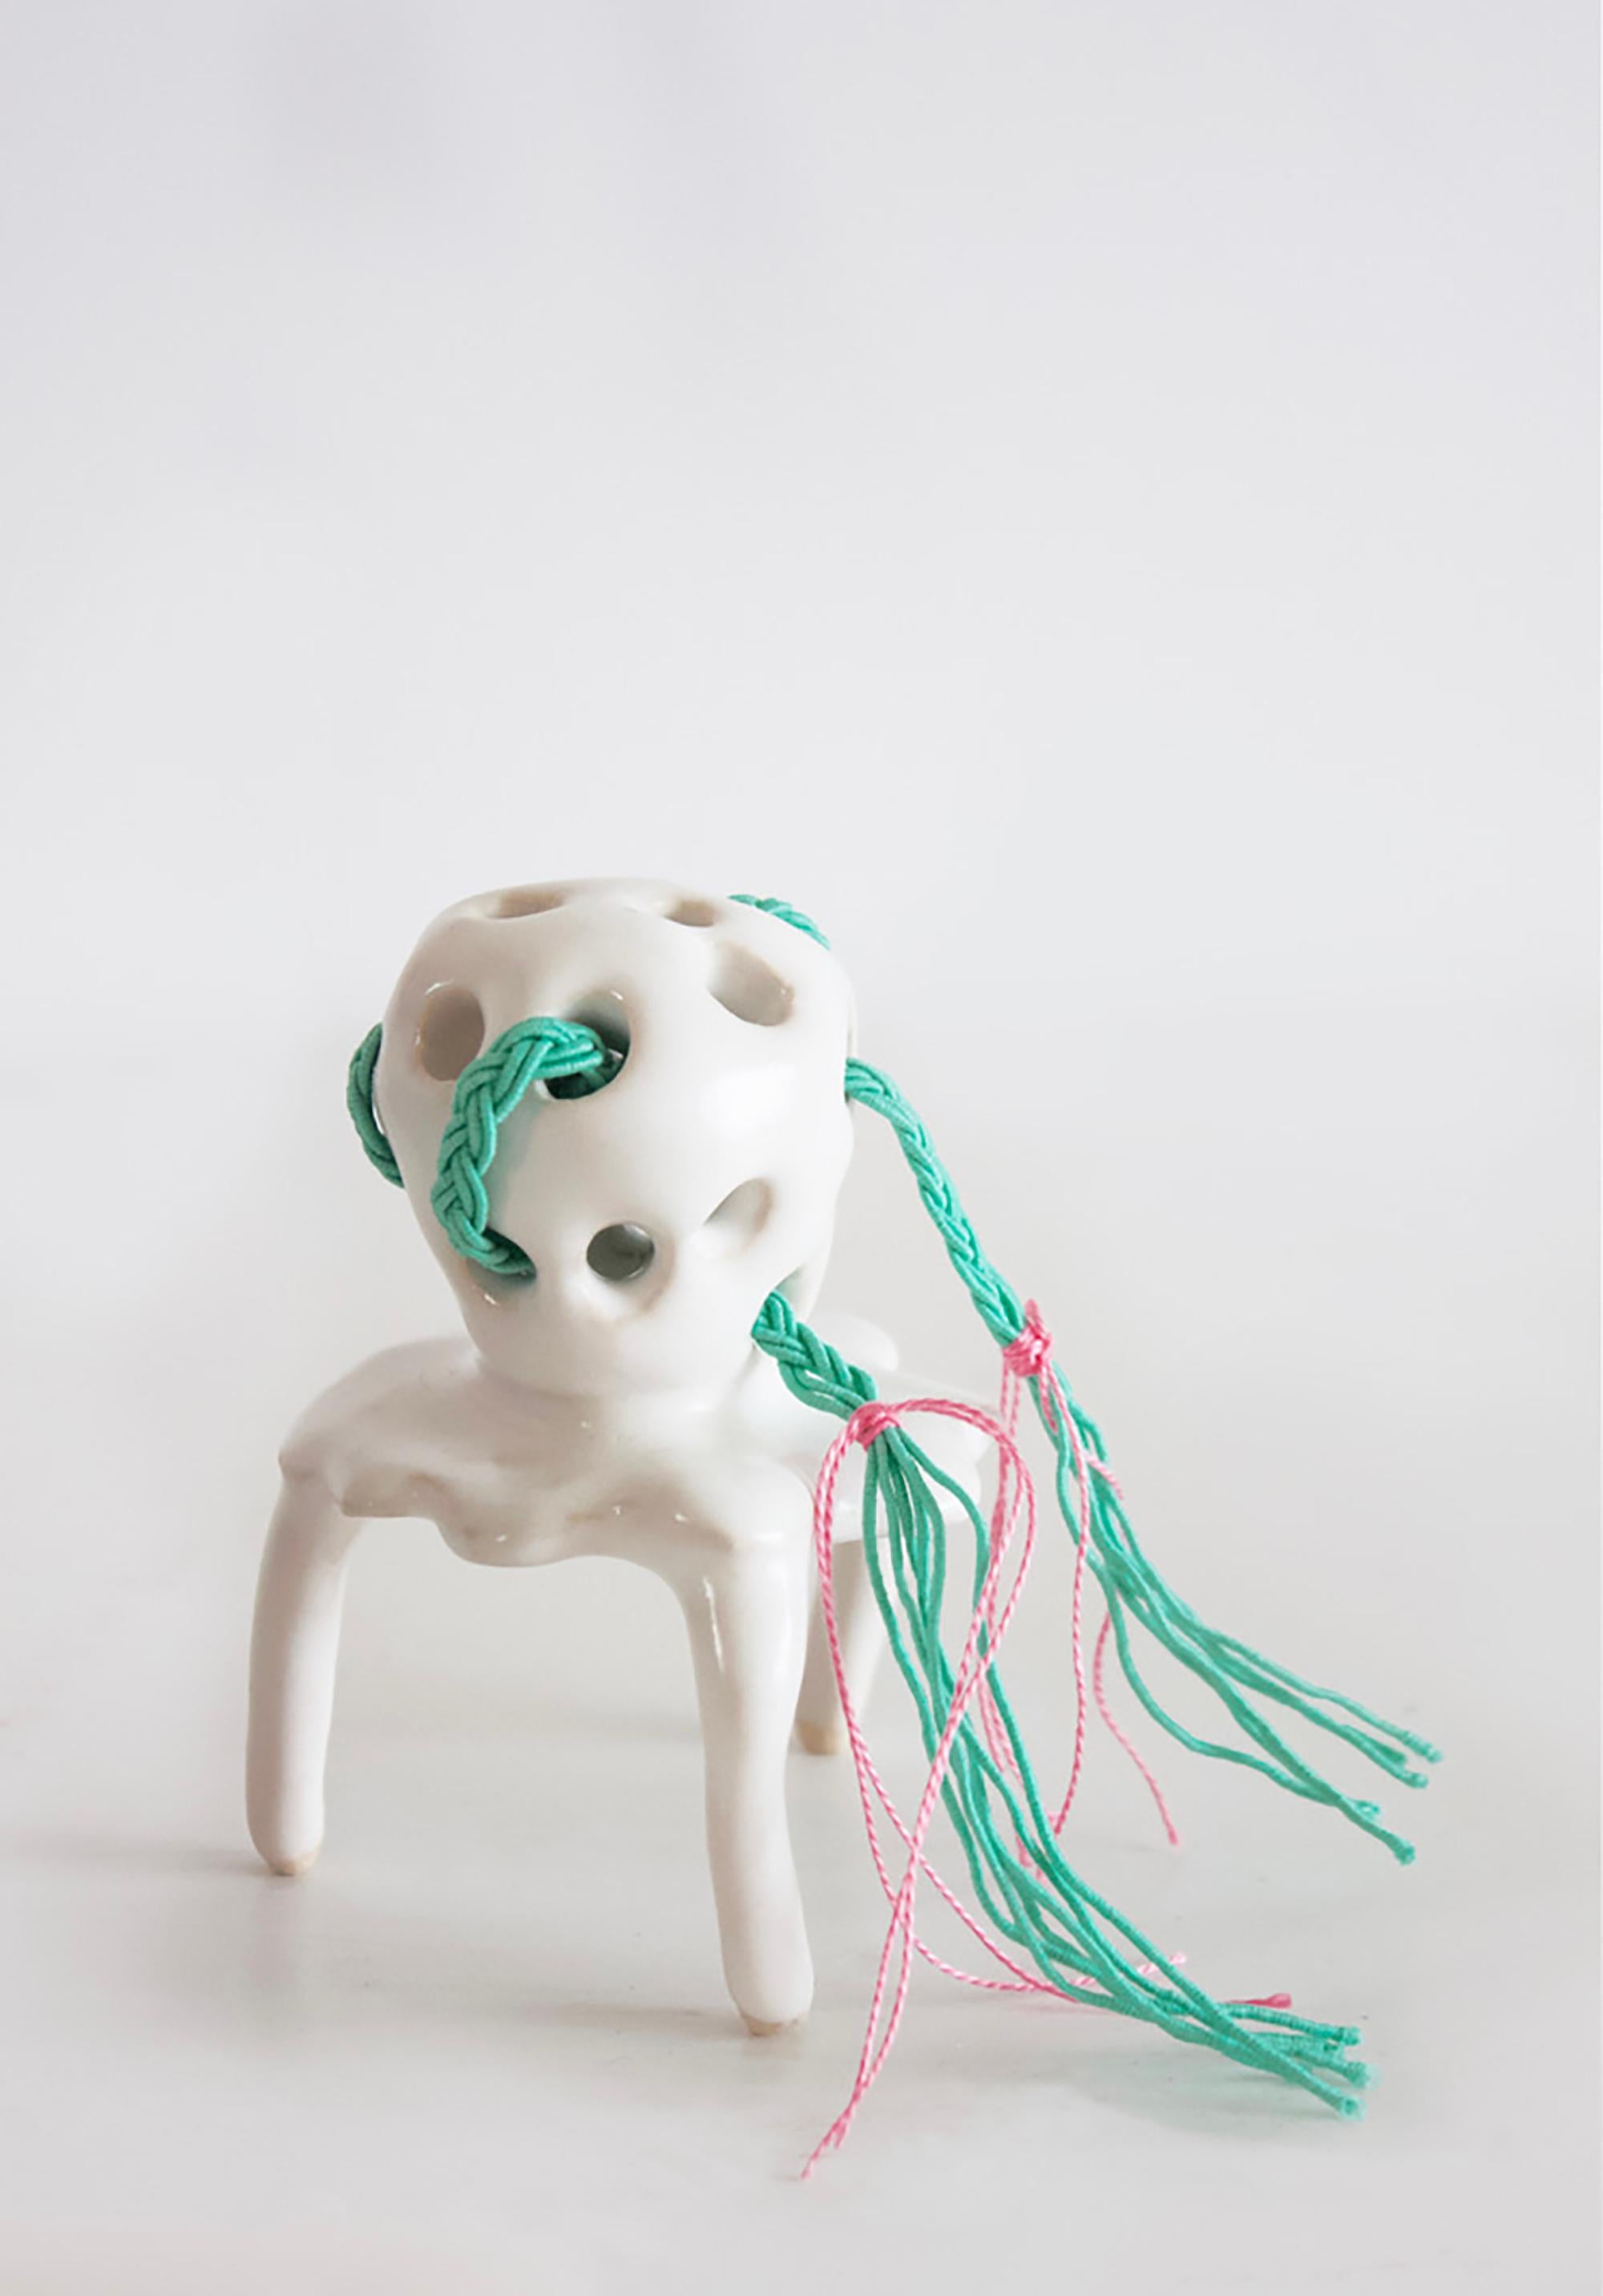 Hanna Washburn Abstract Sculpture - Pigtails